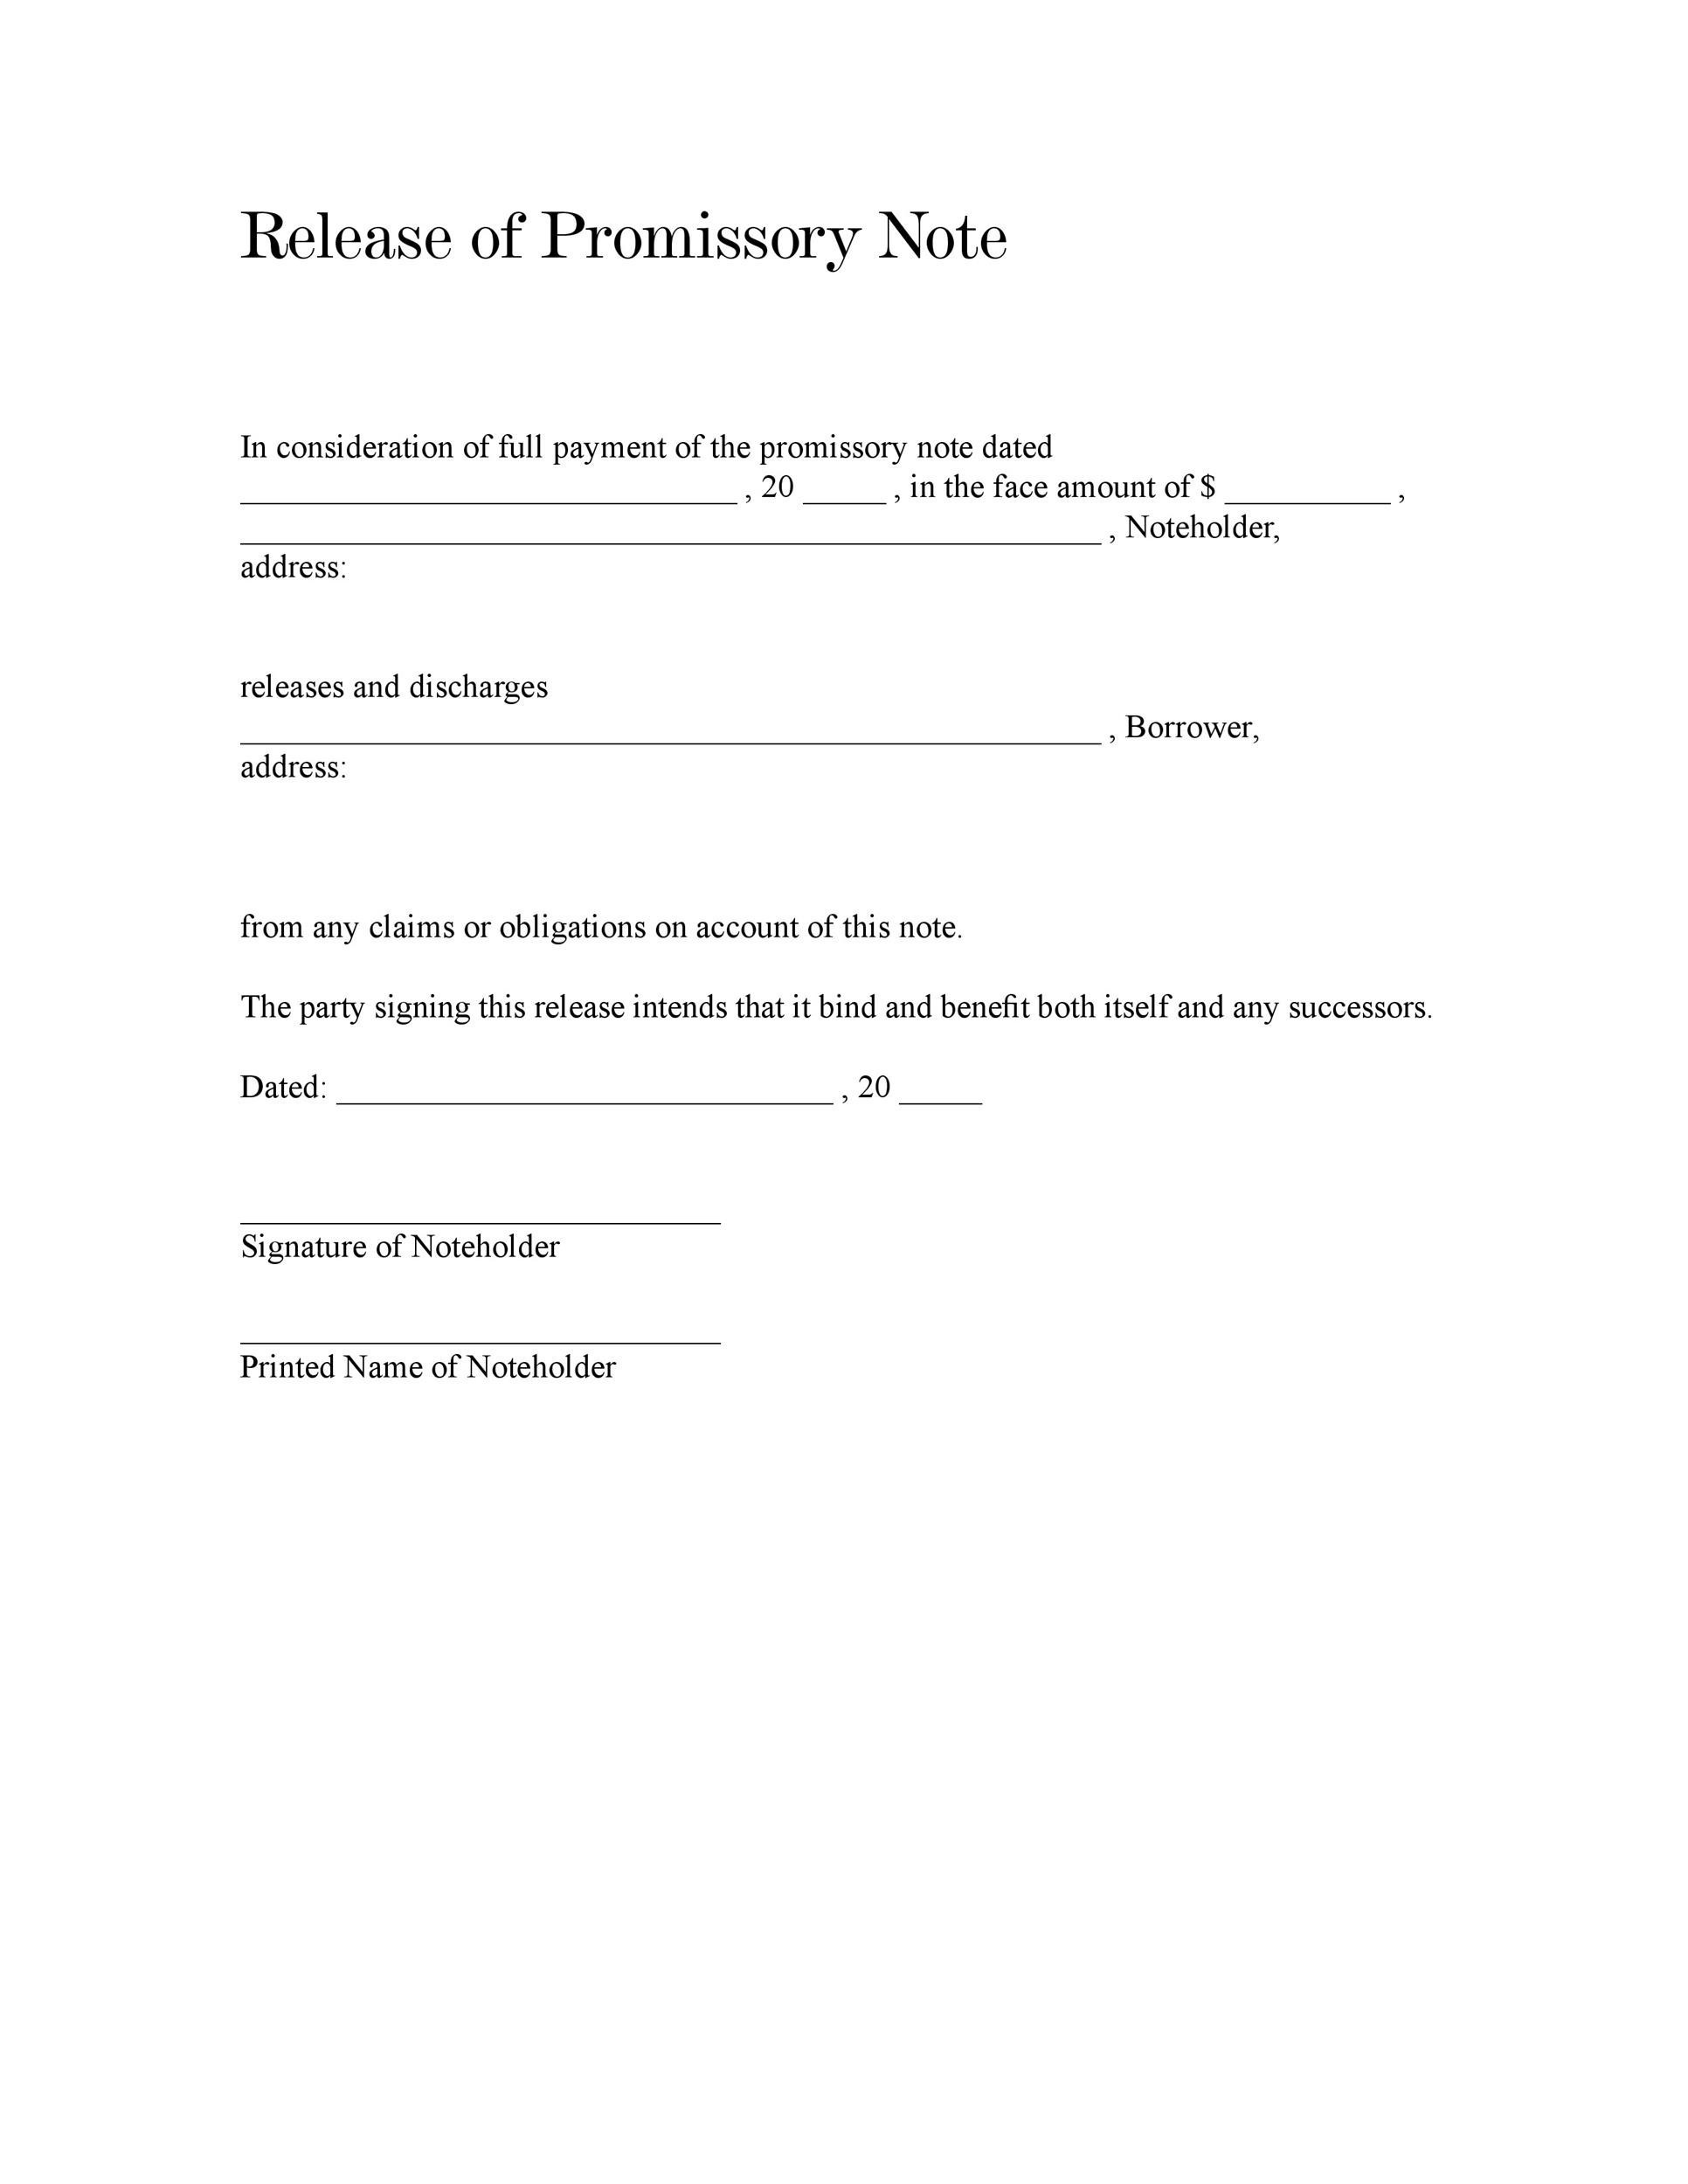 printable-promissory-note-customize-and-print